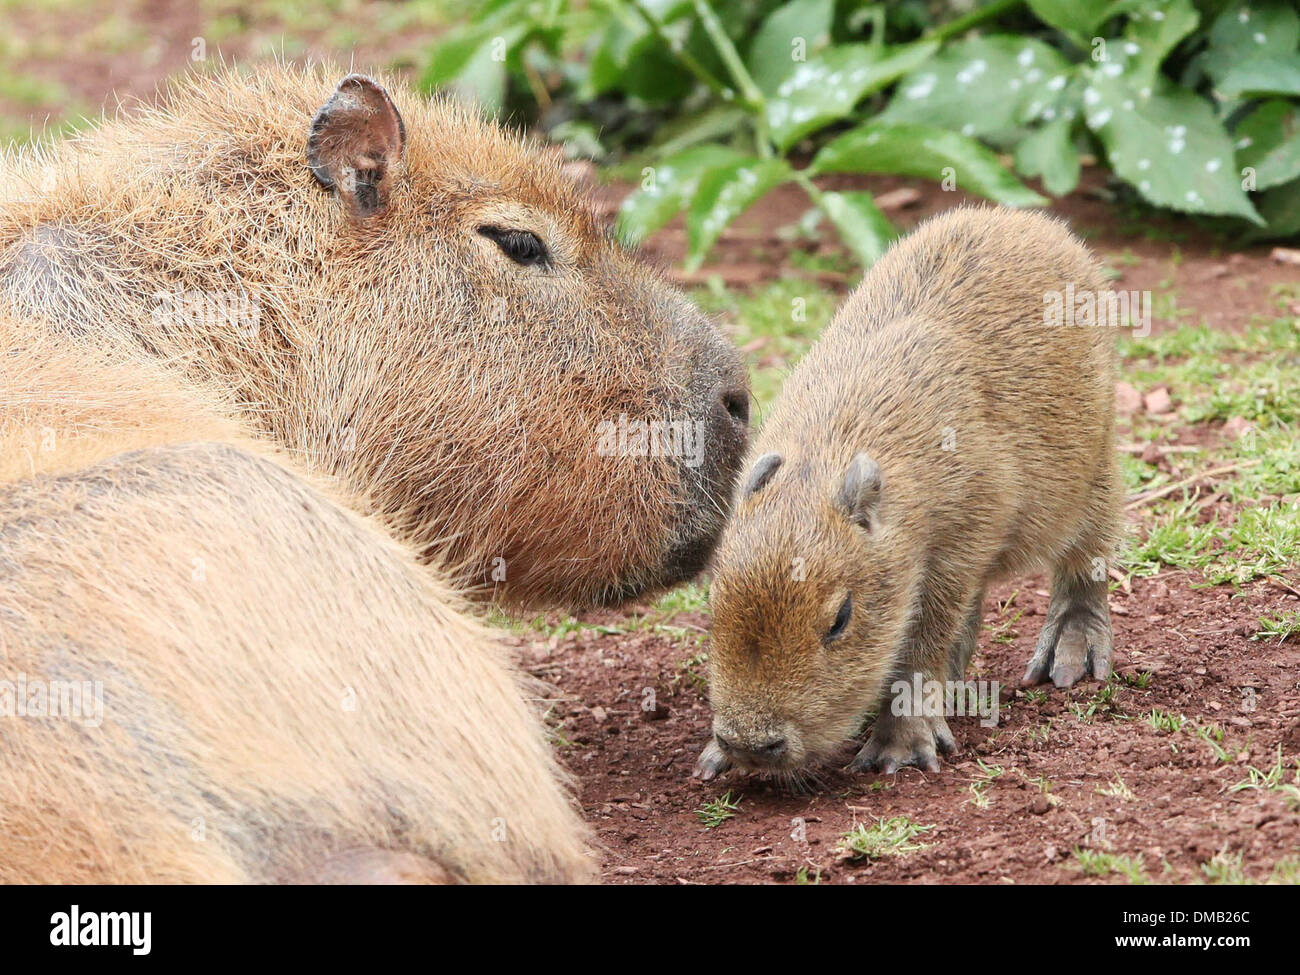 https://c8.alamy.com/comp/DMB26C/a-baby-capybara-and-its-mother-at-paignton-zoo-in-devon-DMB26C.jpg